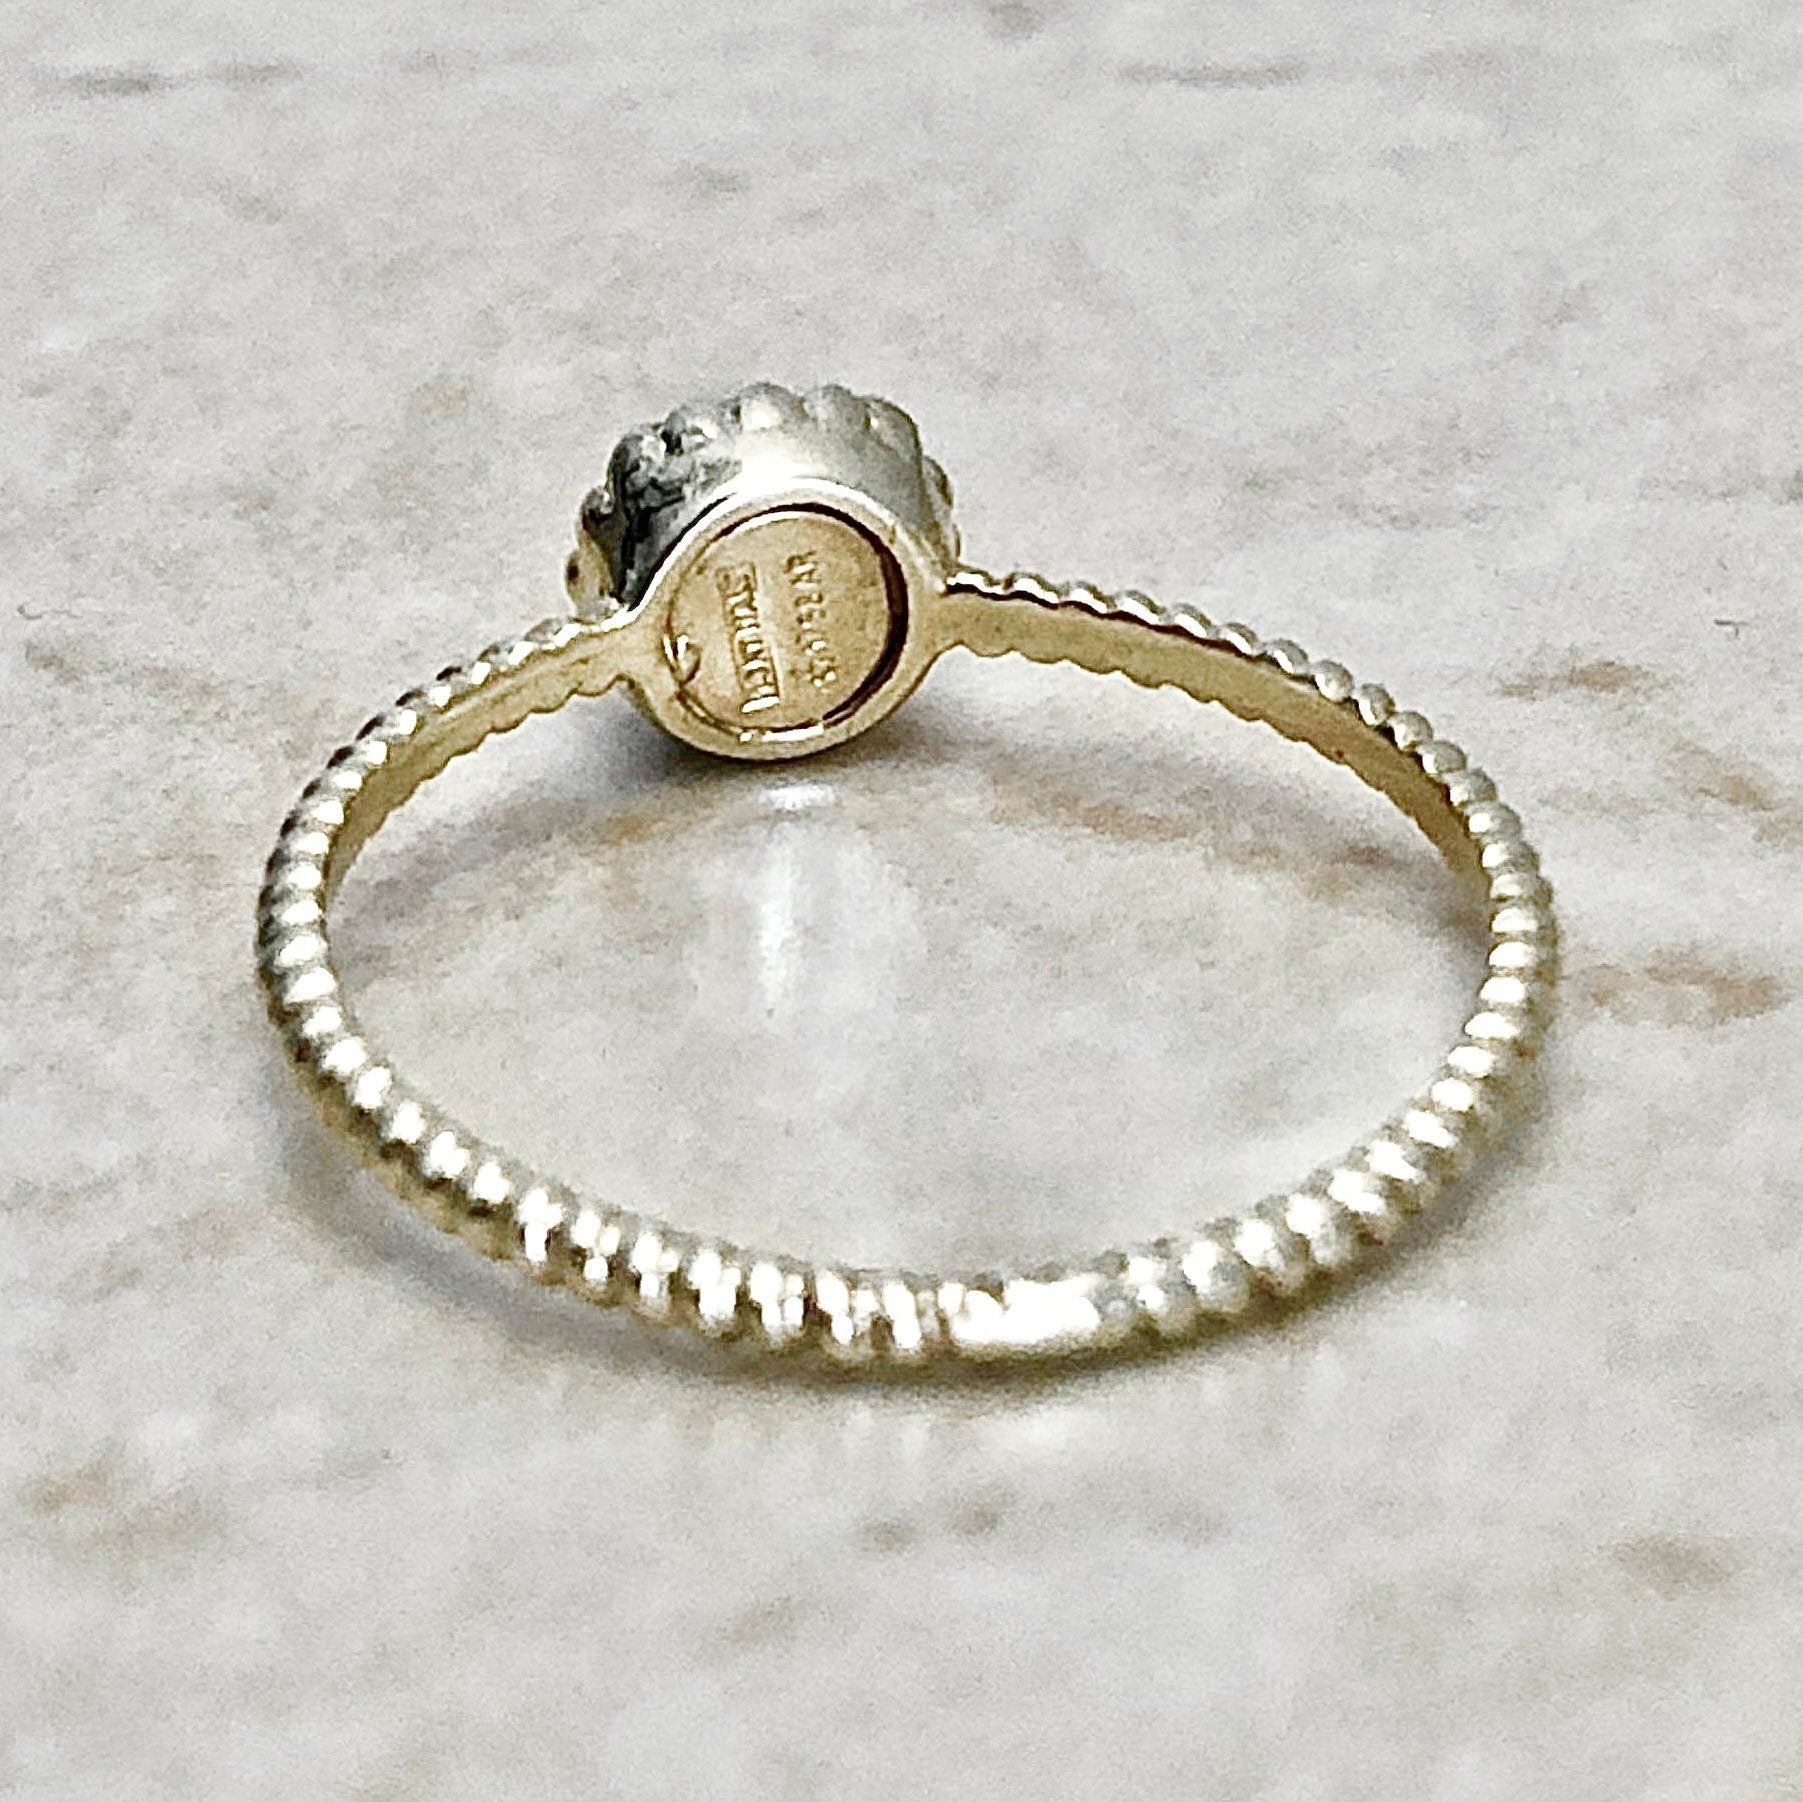 14K Italian Yellow Gold Moonstone Ring - Yellow Gold Cocktail Ring - June Birthstone - Birthday Gift - Best Gift For Her - Size 6